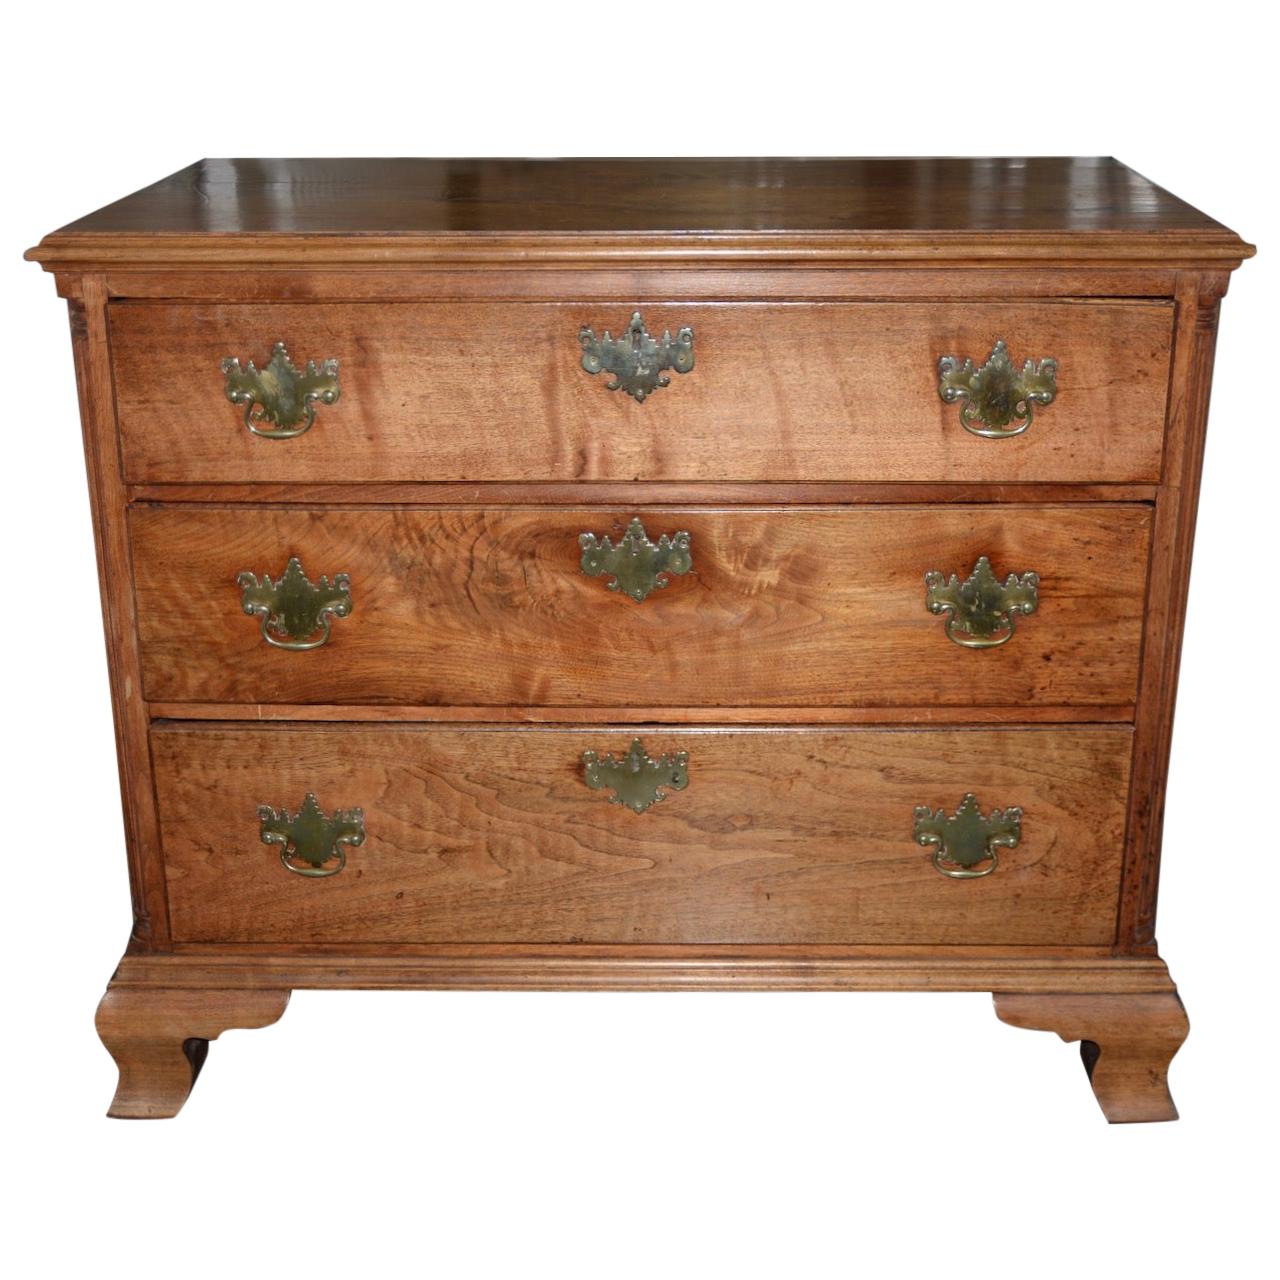 Early American Chippendale Period Maple Chest of Drawers